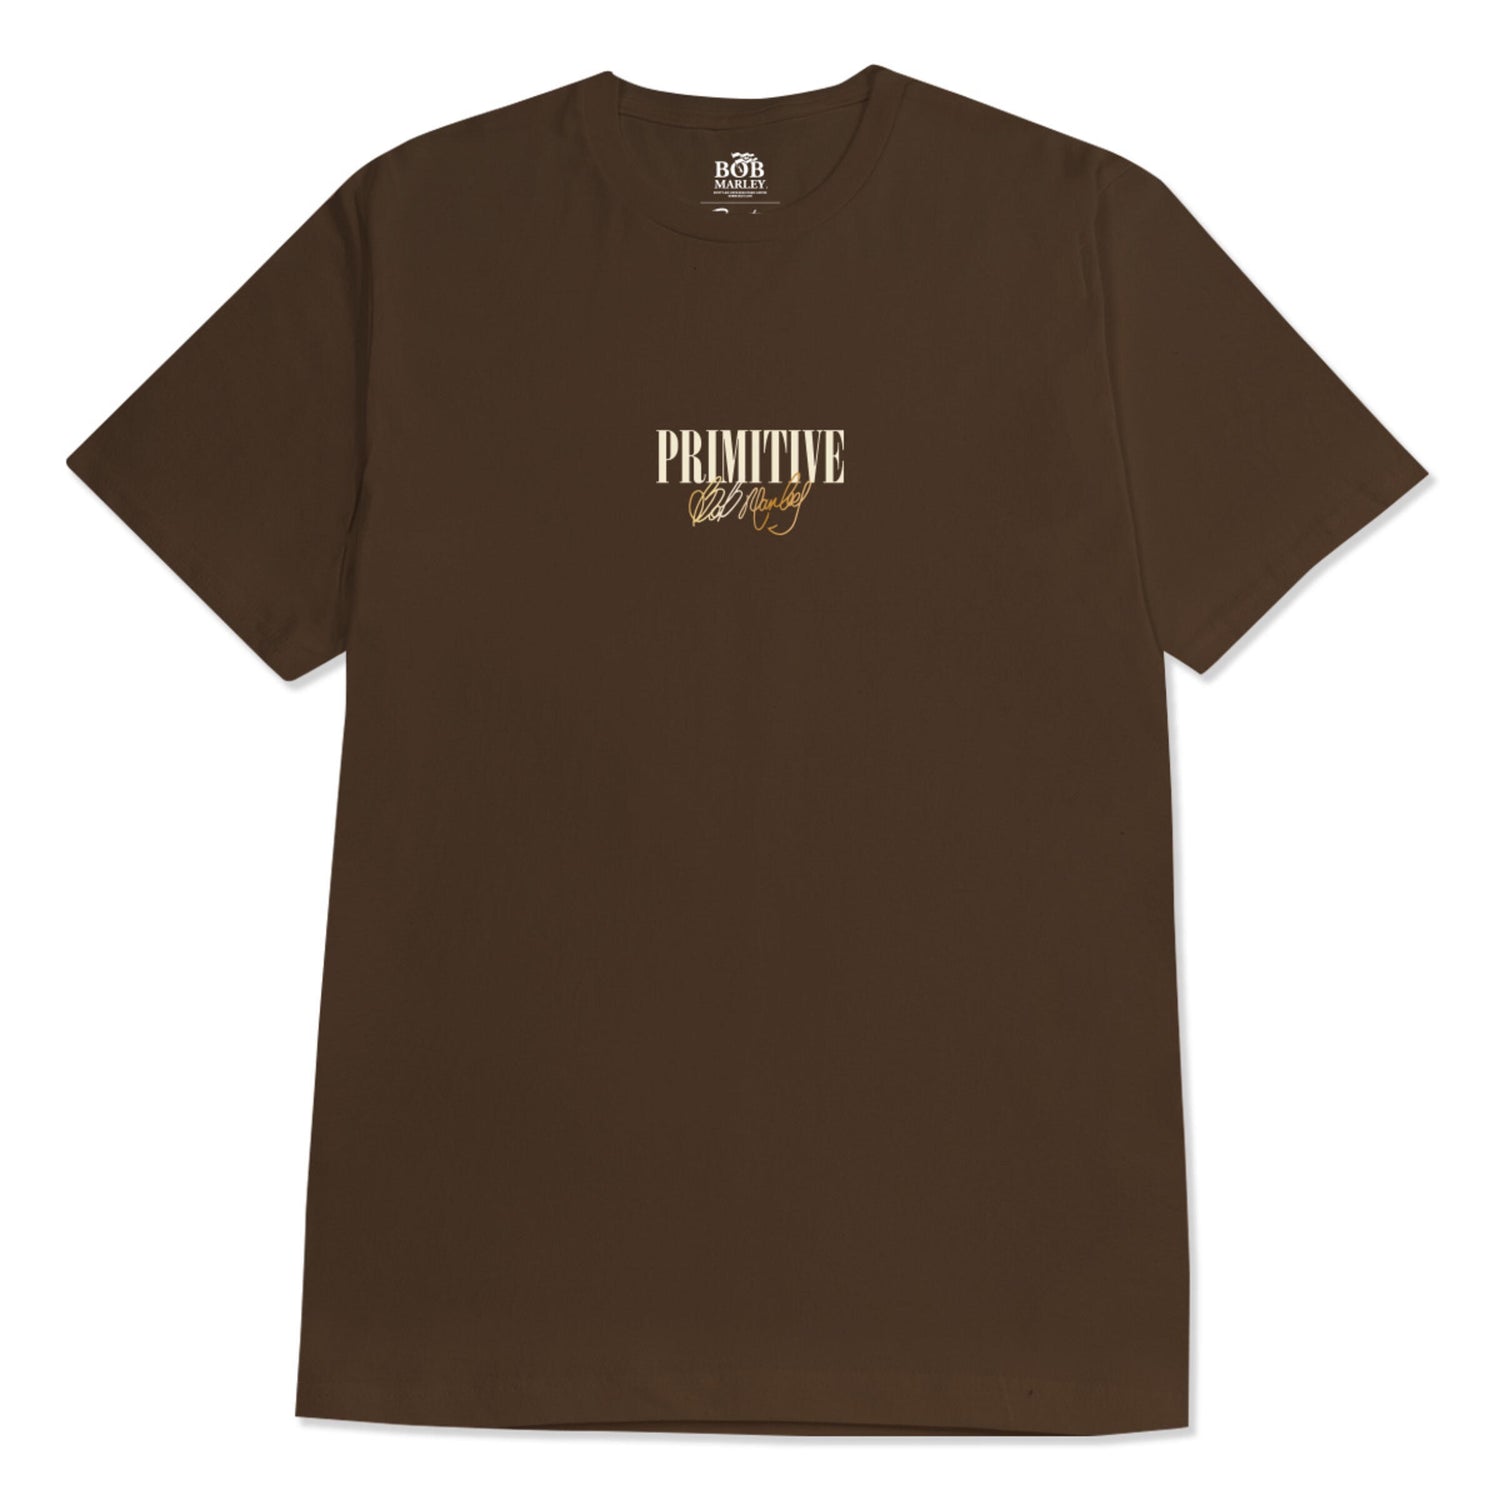 Primitive x Bob Marley Forever Tee - Brown